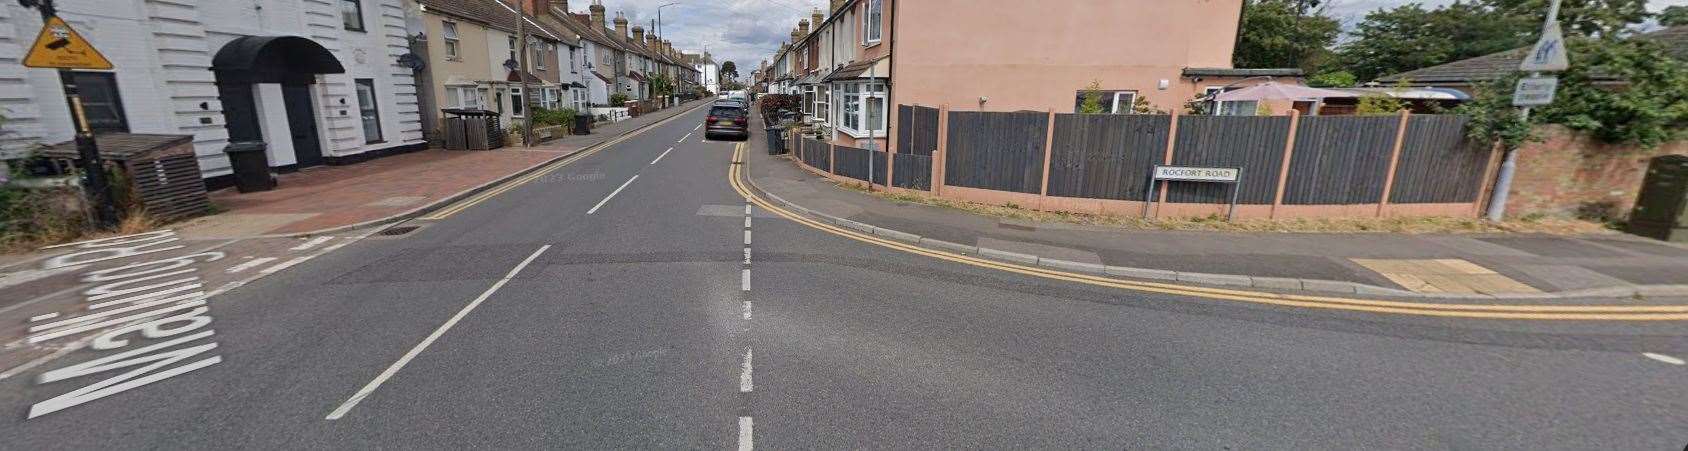 Part of the A228 in Snodland has been closed. Photo credit: Google Maps